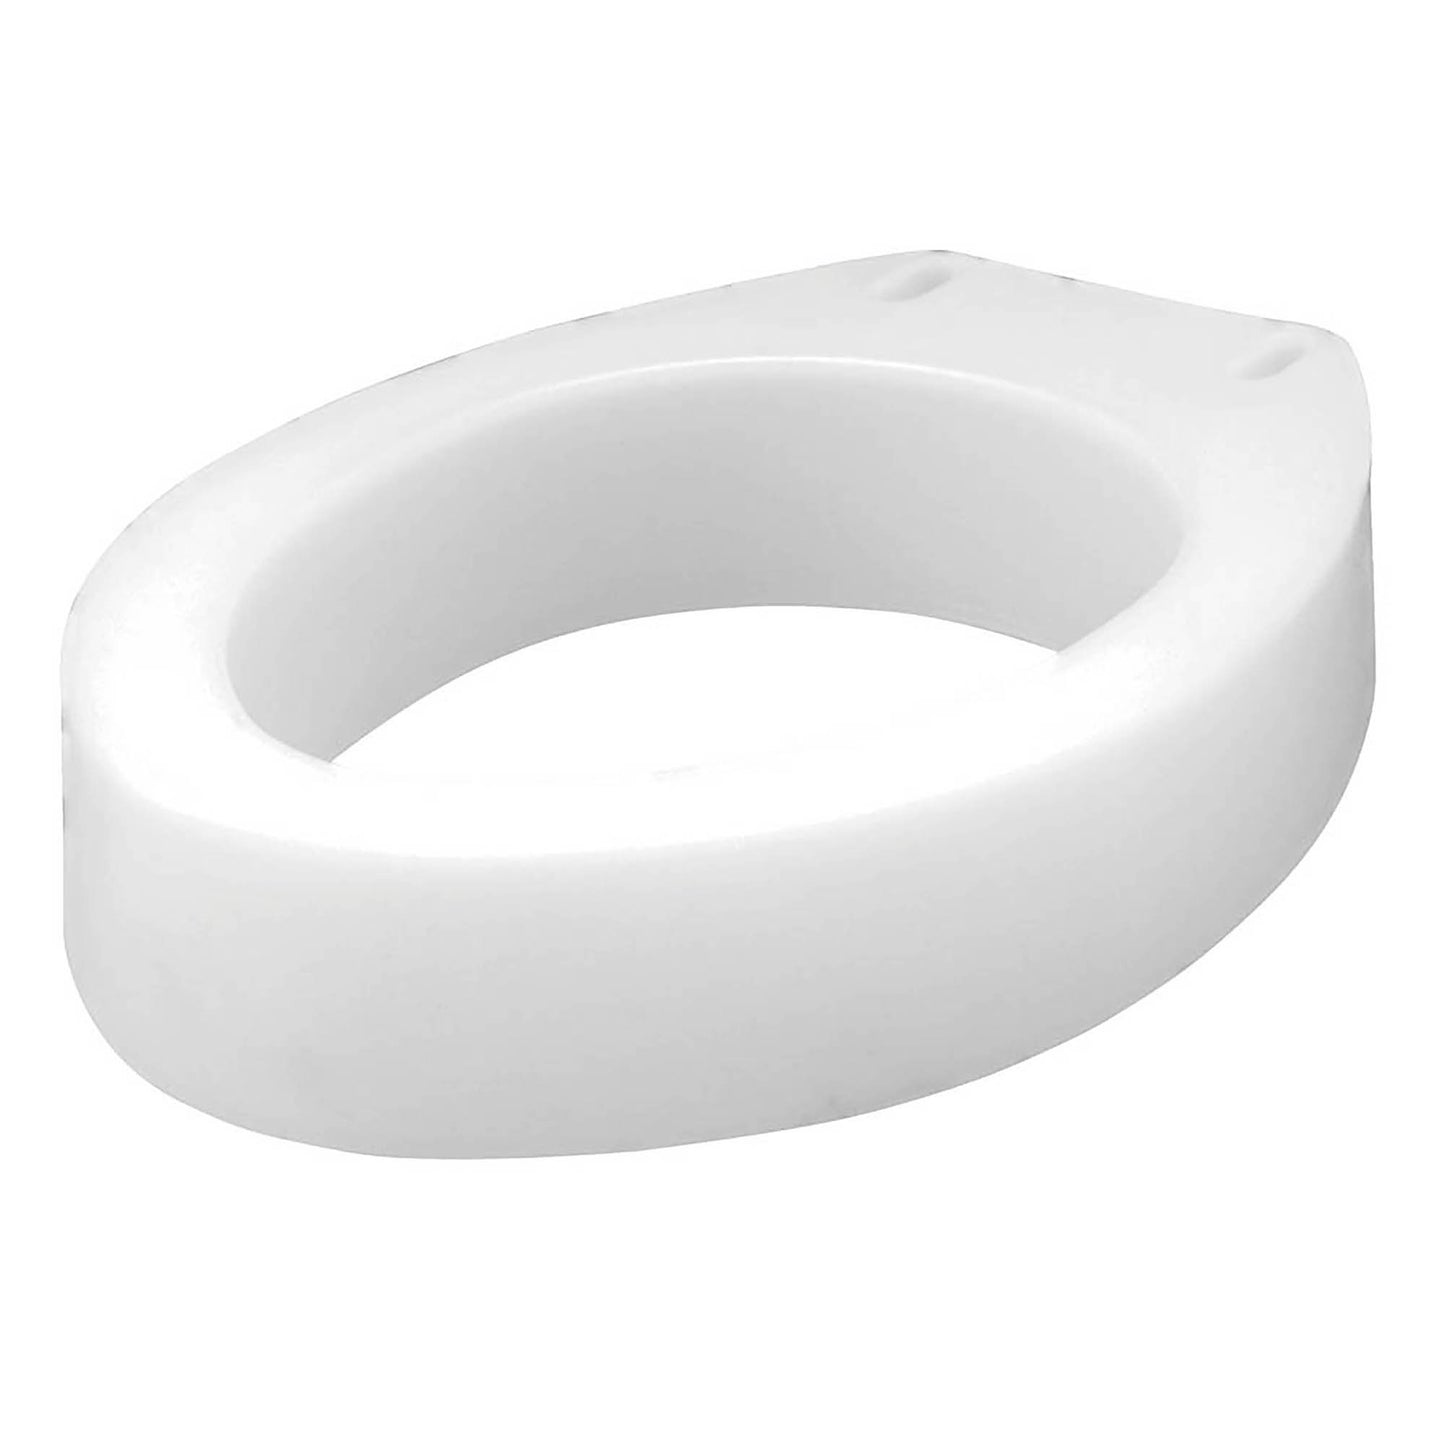 Carex Elongated Raised Toilet Seat, White, 3.5 Inches, 300 lbs. Capacity